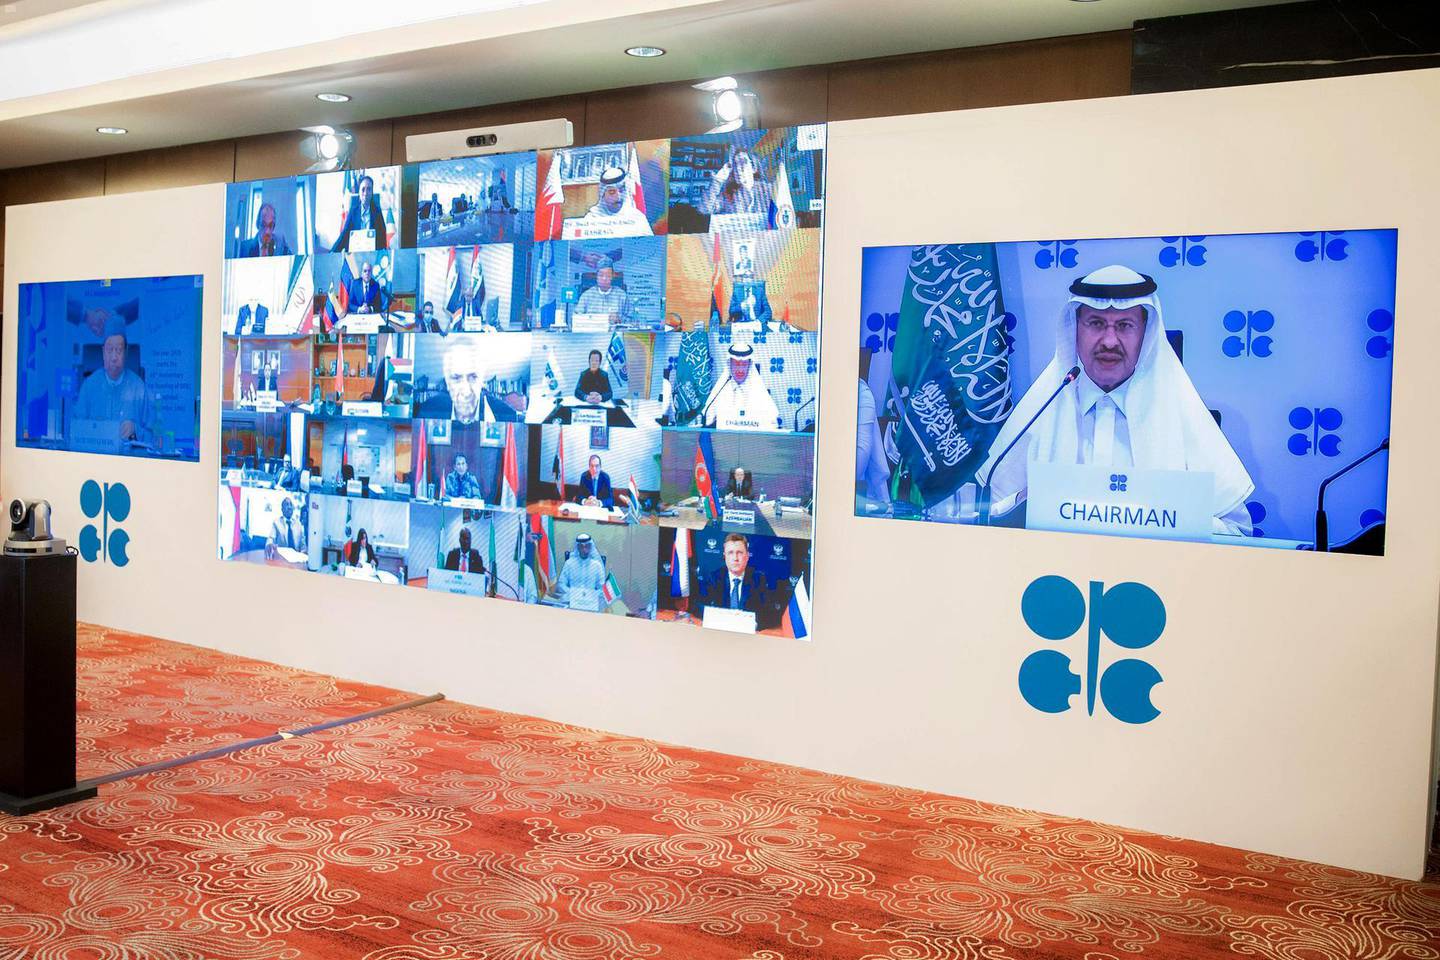 Saudi Arabia's Minister of Energy Prince Abdulaziz bin Salman Al-Saud speaks via video link during a virtual emergency meeting of OPEC and non-OPEC countries, following the outbreak of the coronavirus disease (COVID-19), in Riyadh, Saudi Arabia April 9, 2020. Picture taken April 9, 2020. Saudi Press Agency/Handout via REUTERS ATTENTION EDITORS - THIS PICTURE WAS PROVIDED BY A THIRD PARTY.